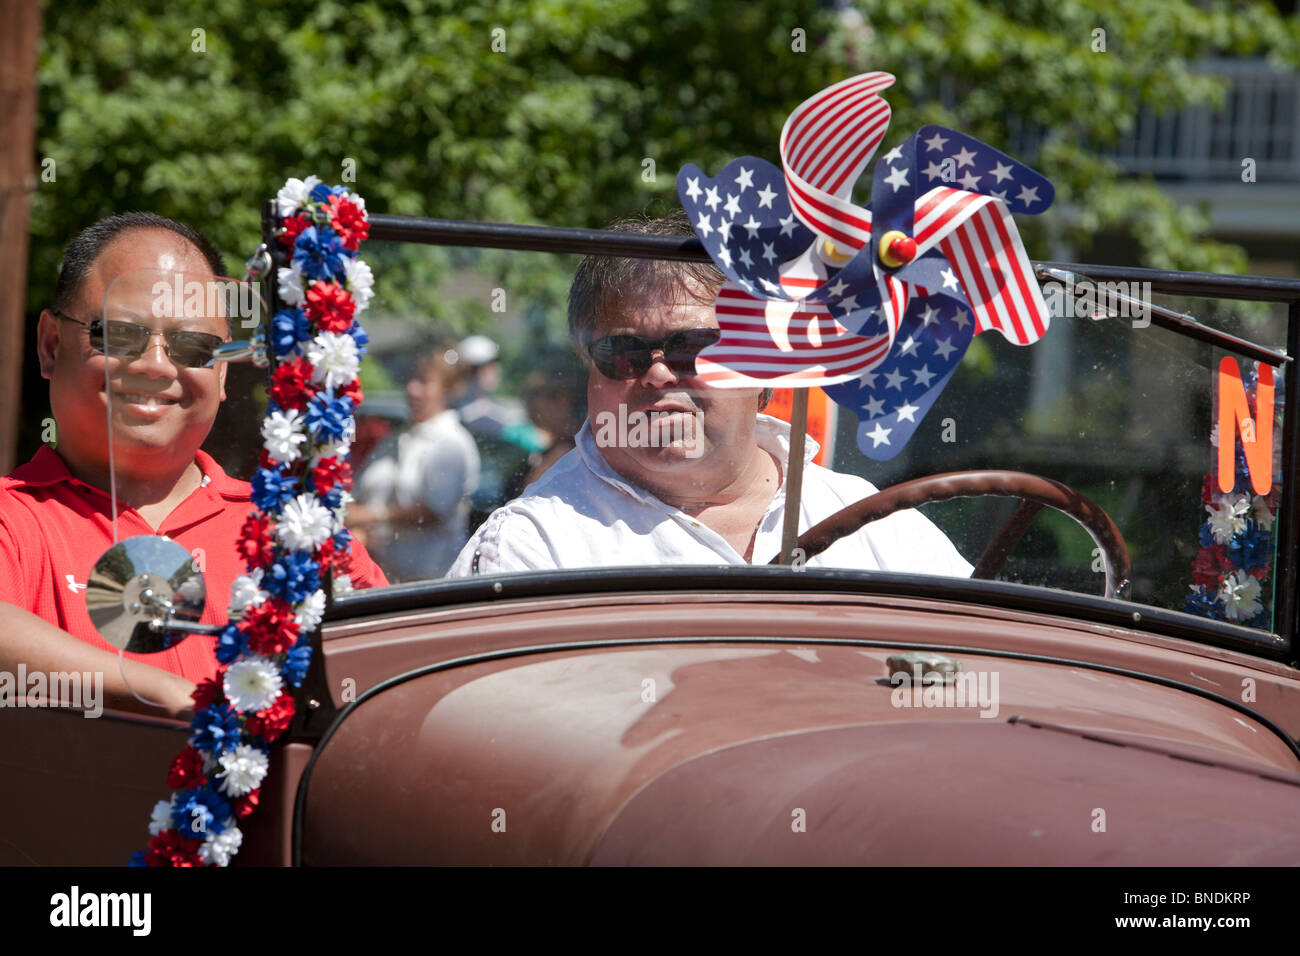 Amherst, New Hampshire - Men in an antique car in the July 4 parade in a small New England town. Stock Photo